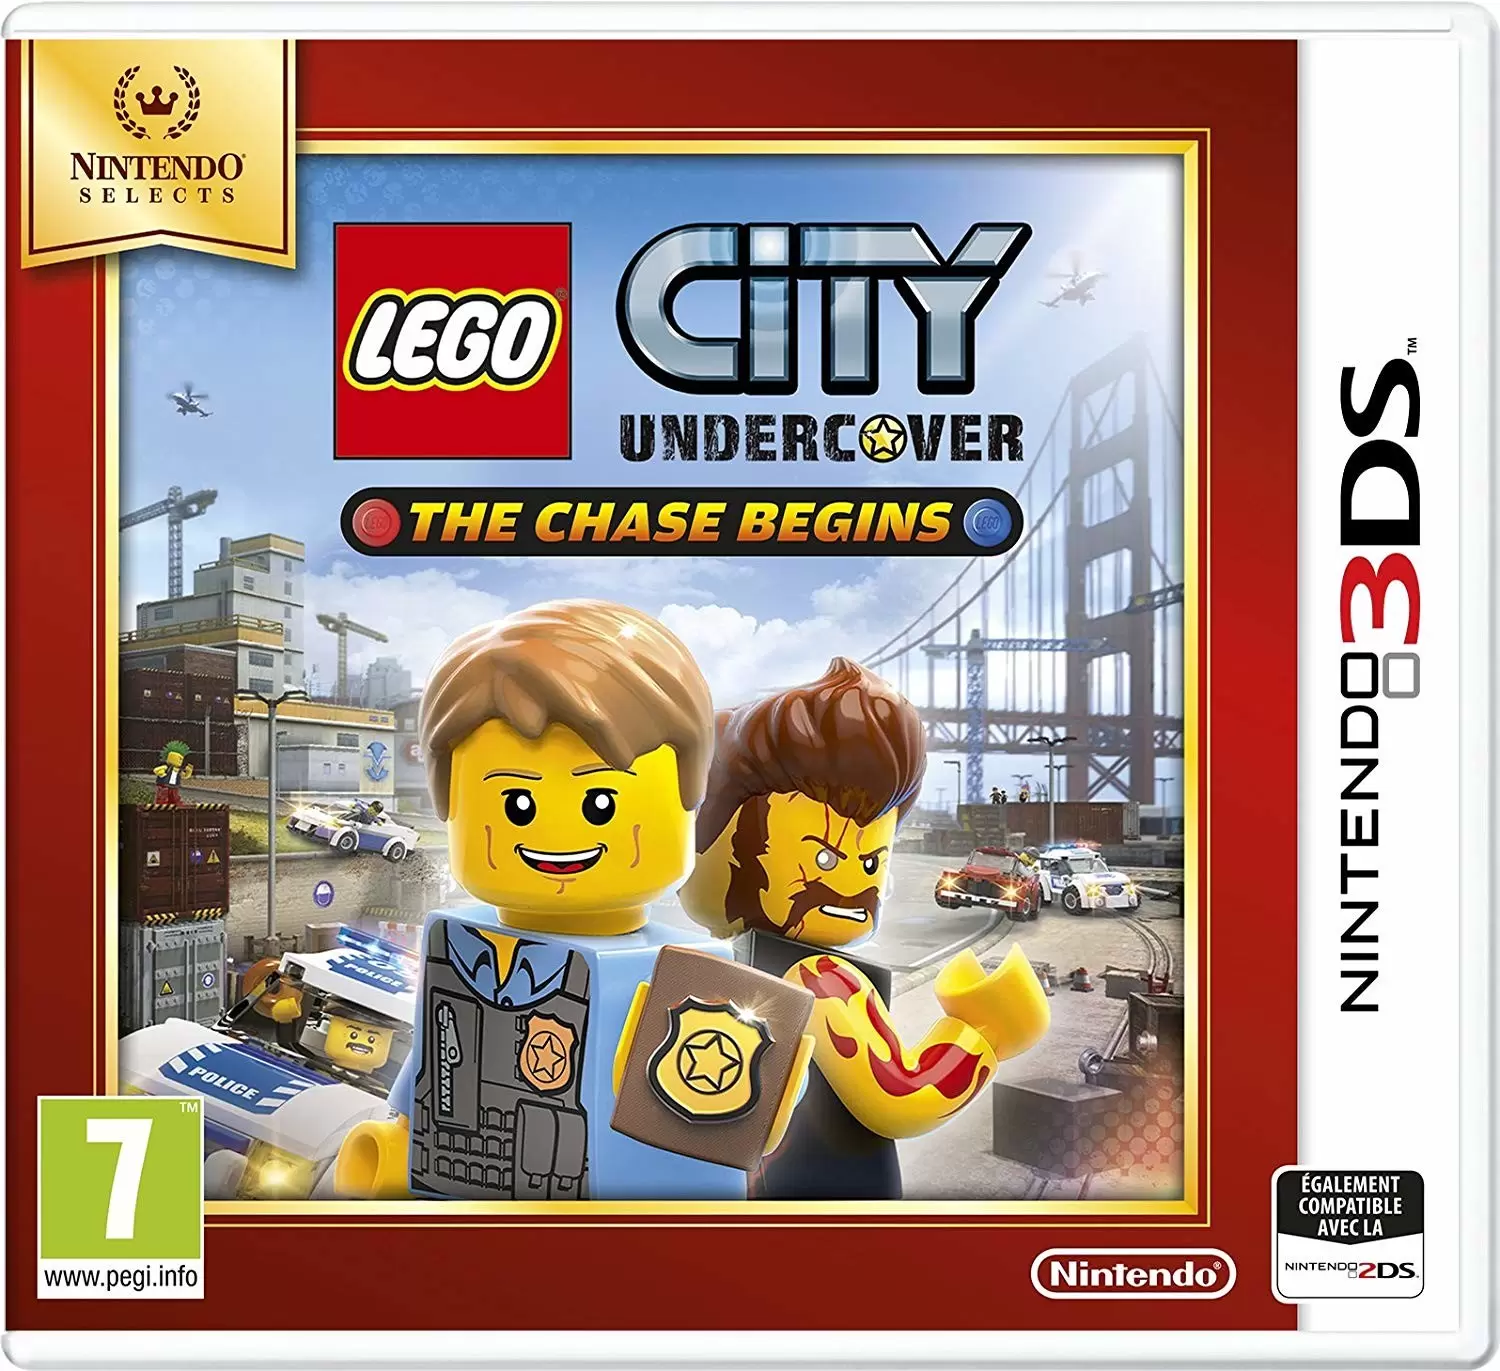 Nintendo 2DS / 3DS Games - Lego City Undercover The Chase Begins (Nintendo Selects)